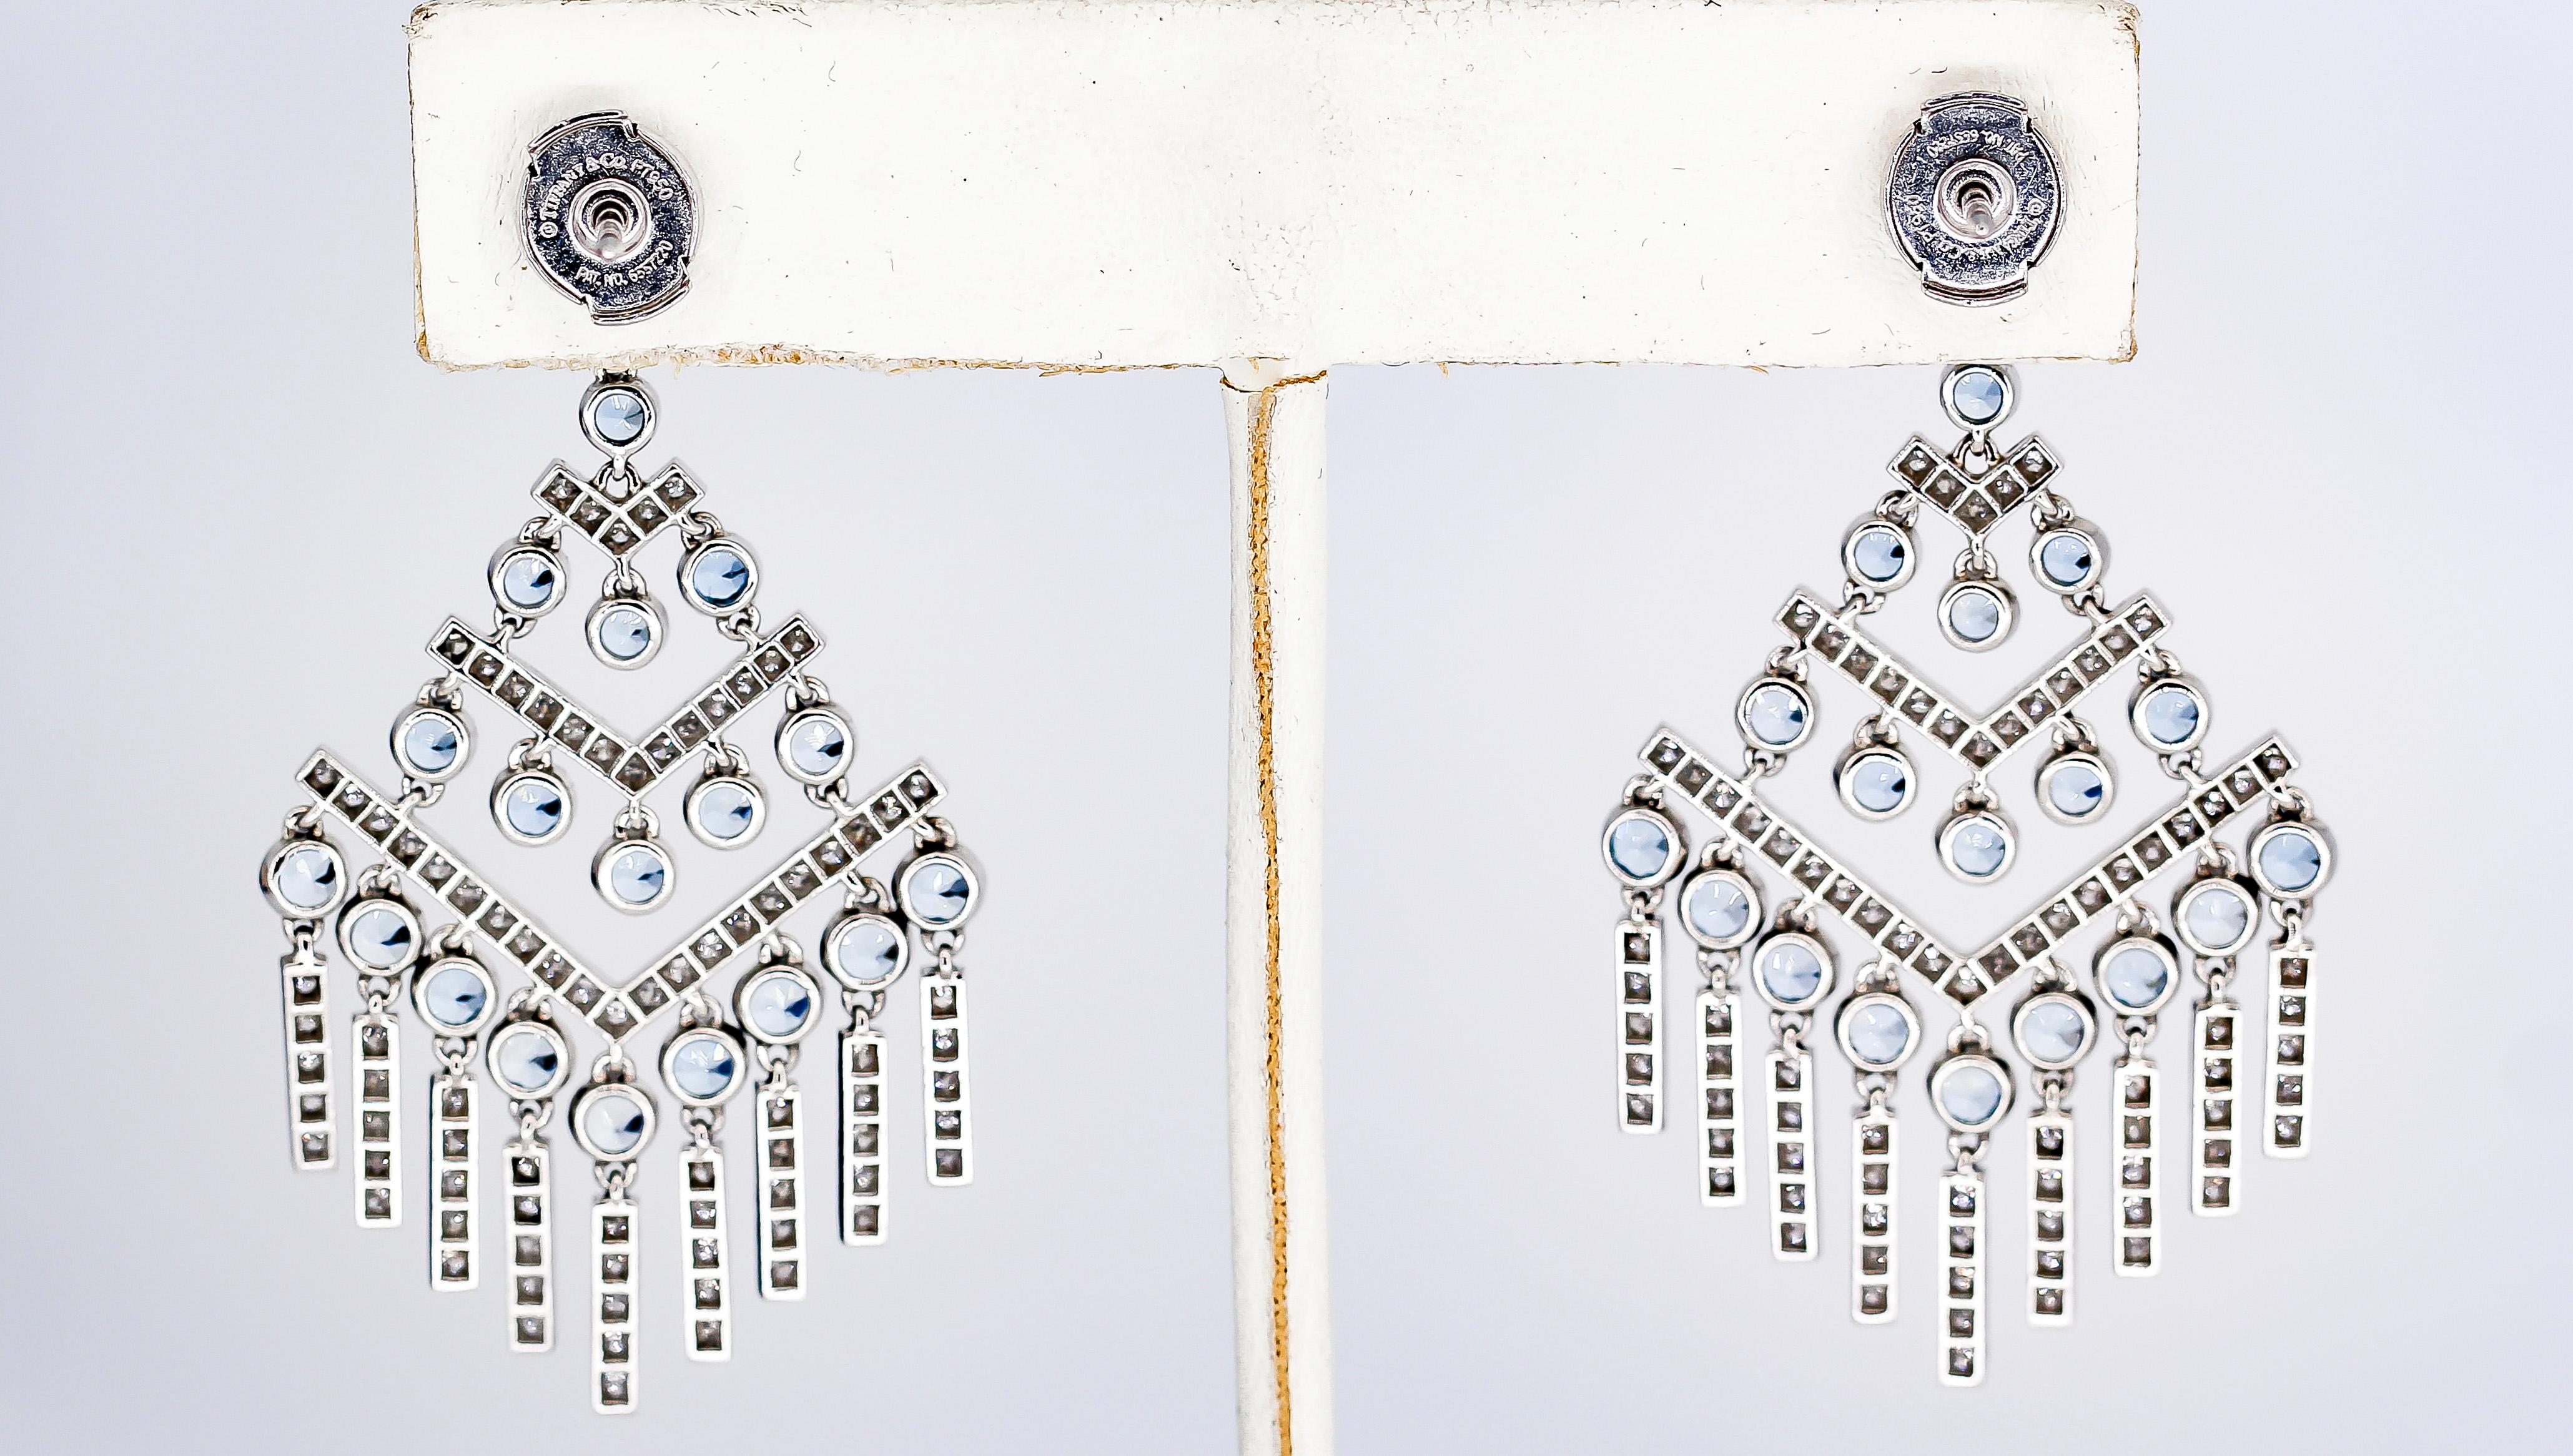 Draping in exquisite splendor, these Tiffany & Co. Aquamarine Diamond and Platinum Chevron Fringe Chandelier Earrings are a testament to the artistry and opulence that define one of the world's most distinguished jewelers. Crafted in 2007, these